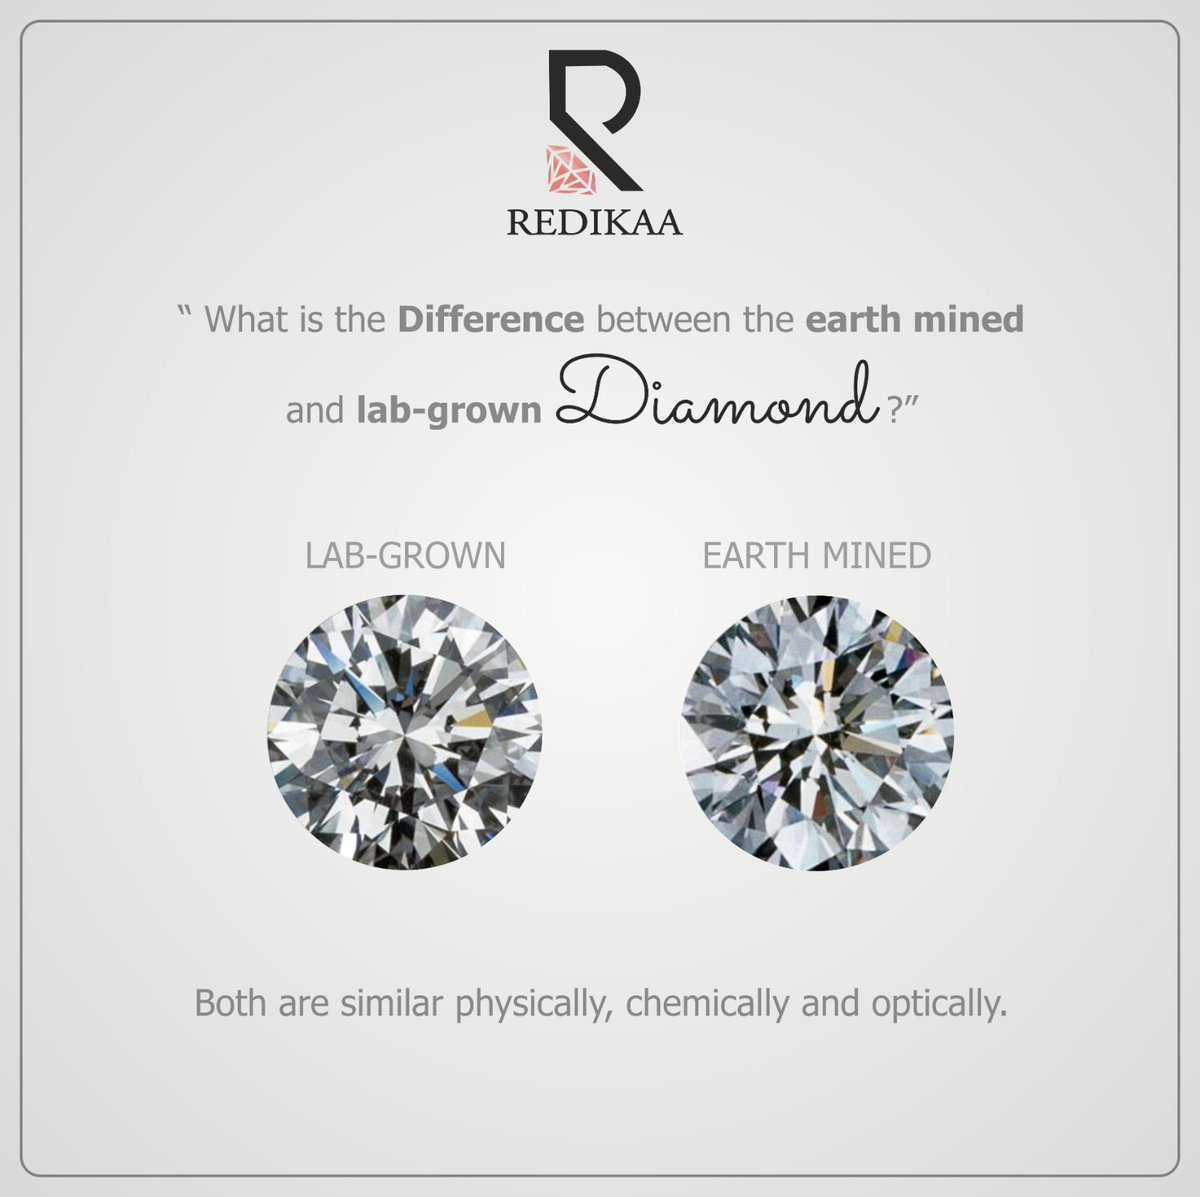 Did you know that lab grown diamonds are just as beautiful and durable as natural diamonds? Plus, they're a more sustainable and ethical choice.
#labgrowndiamonds #sustainability #DiamondSparkle #LooseDiamonds #Diamonds #DiamondLifE #DiamondAddict #diamondeducation #Redikaa